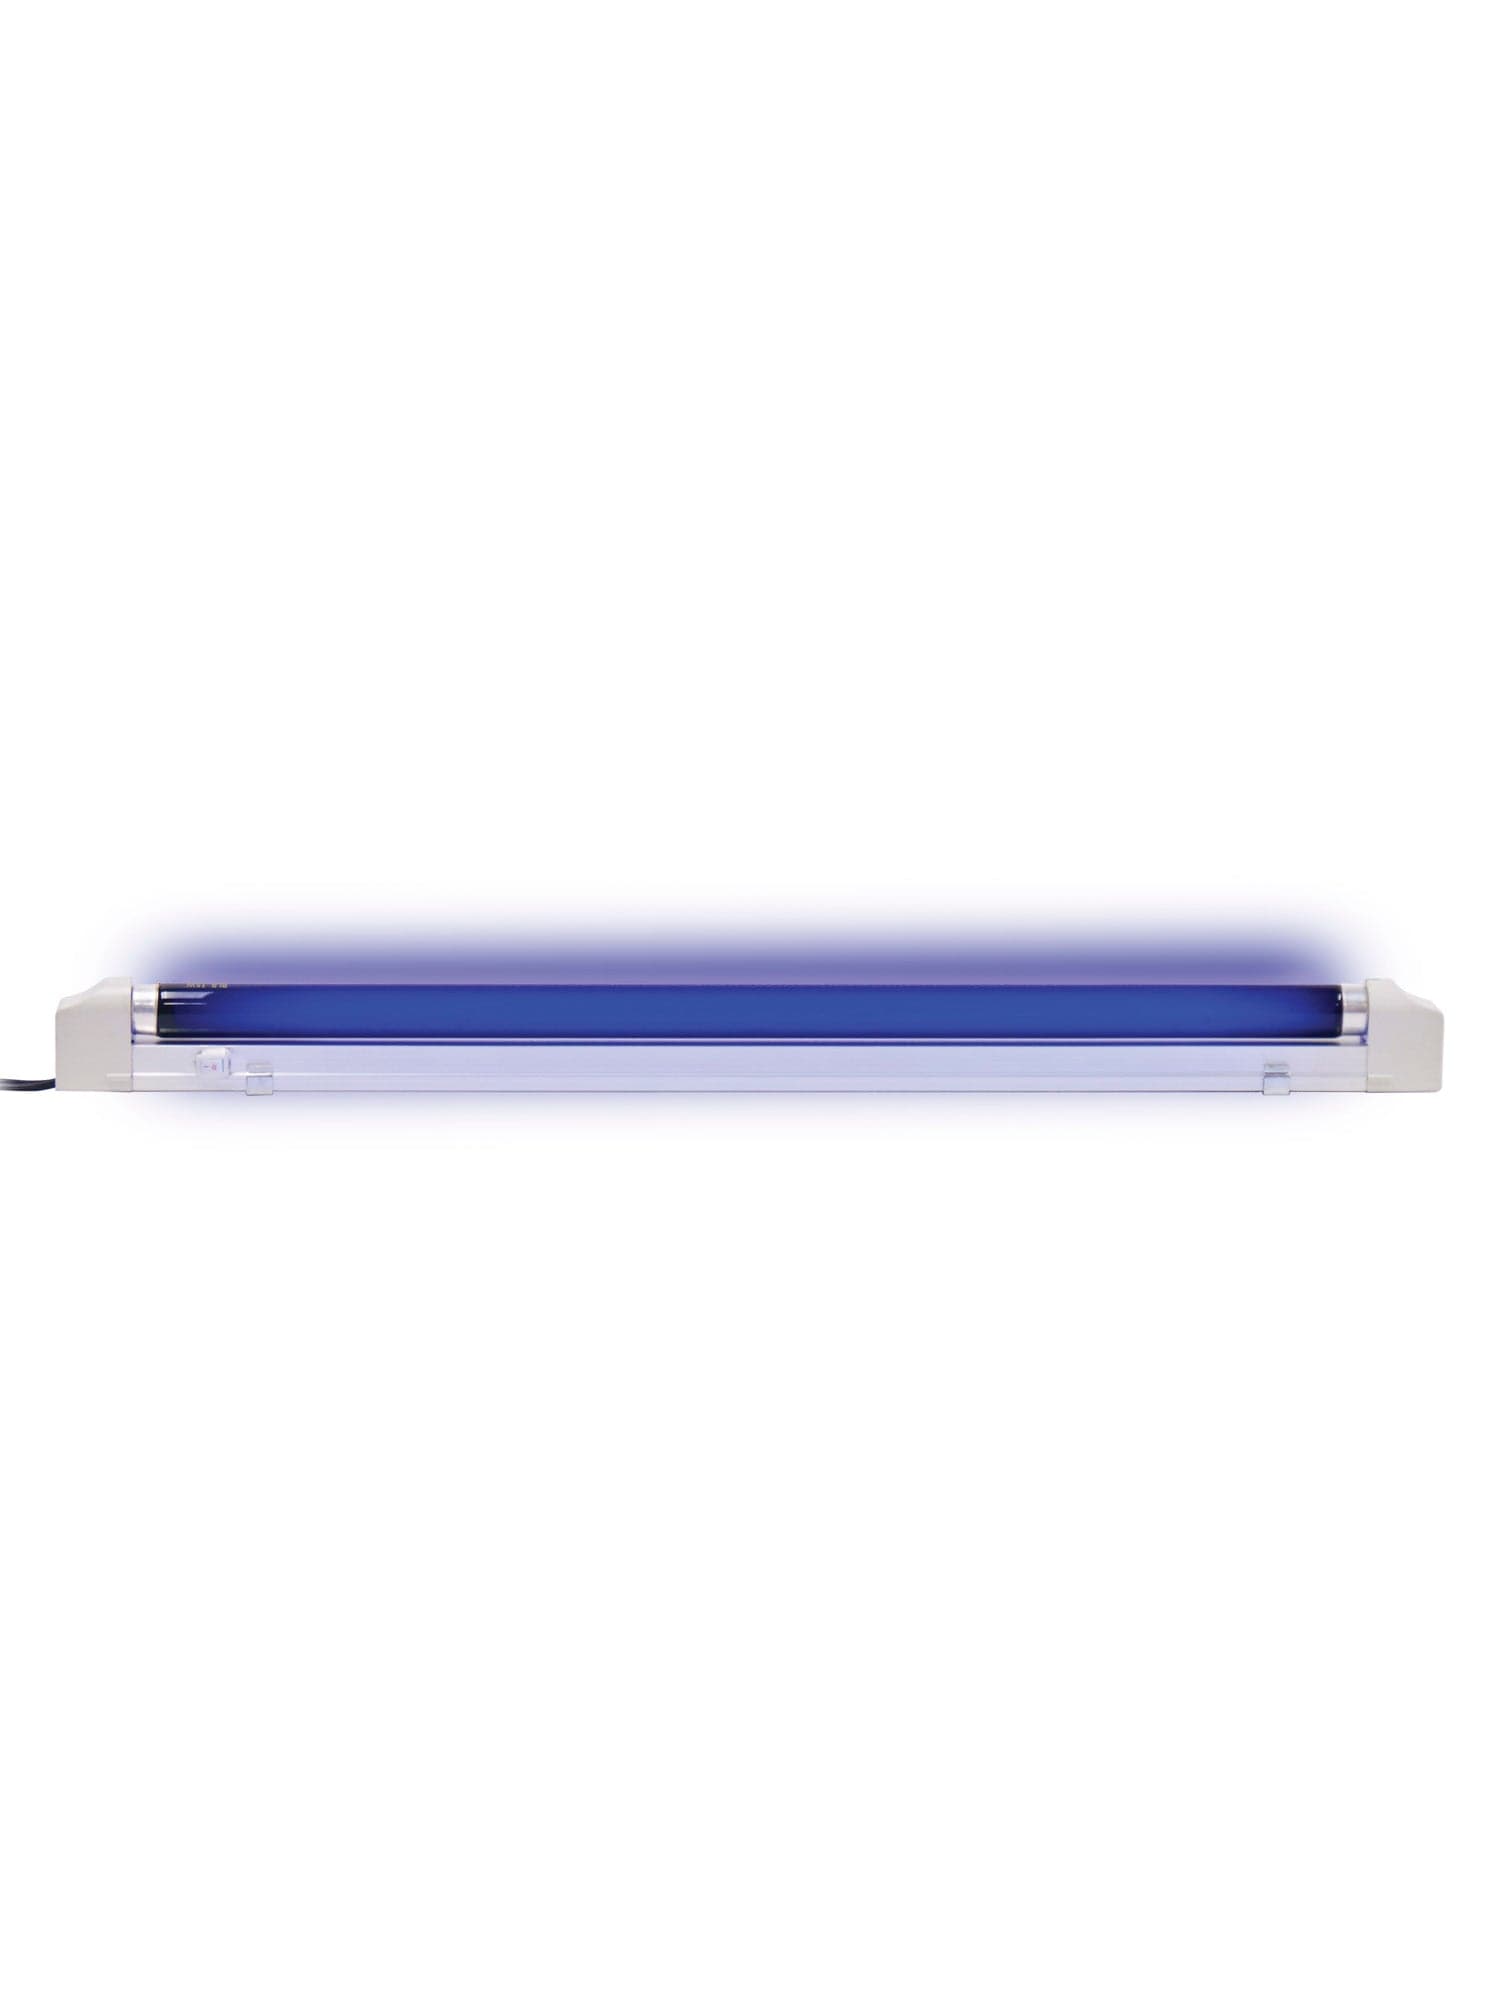 48-inch Replacement Blacklight Bulb - costumes.com